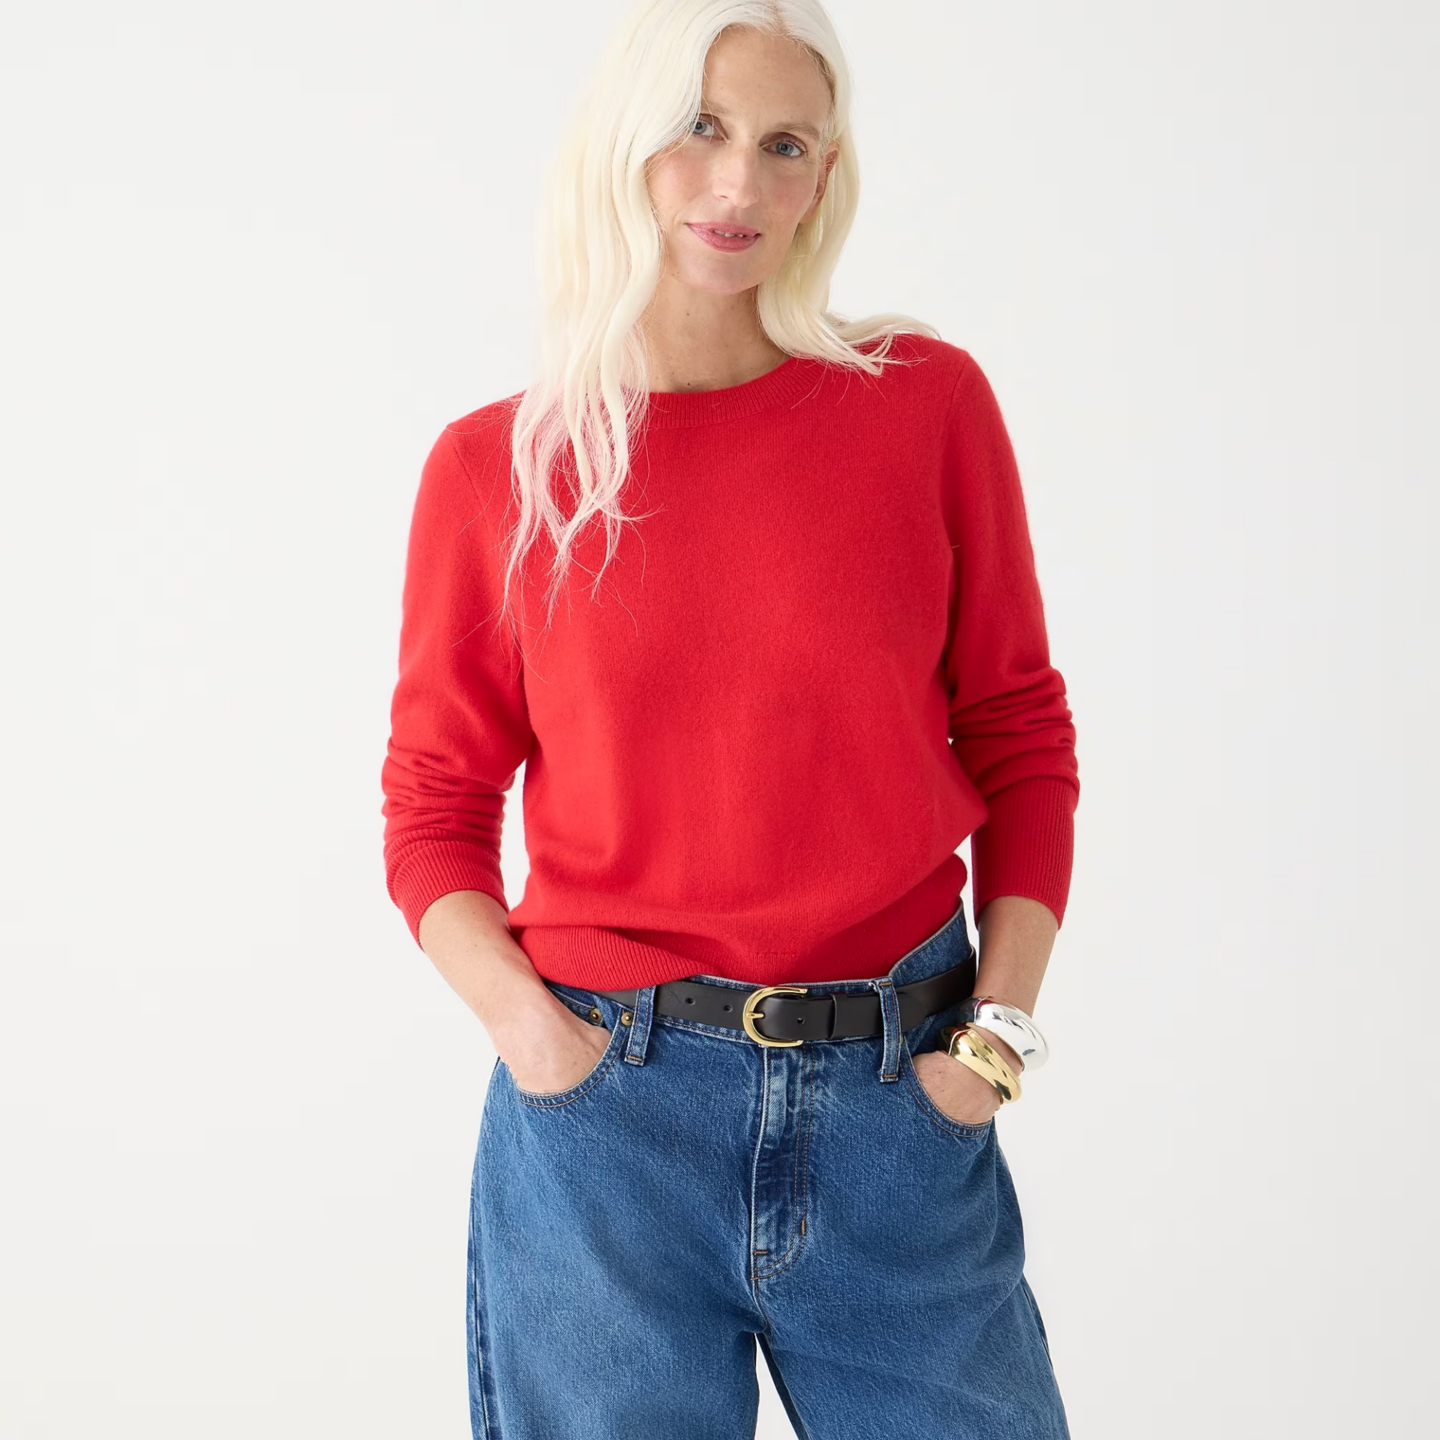 Cashmere Crewneck Sweater in Festival Red, J. Crew. #cashmeresweaters #redcashmere